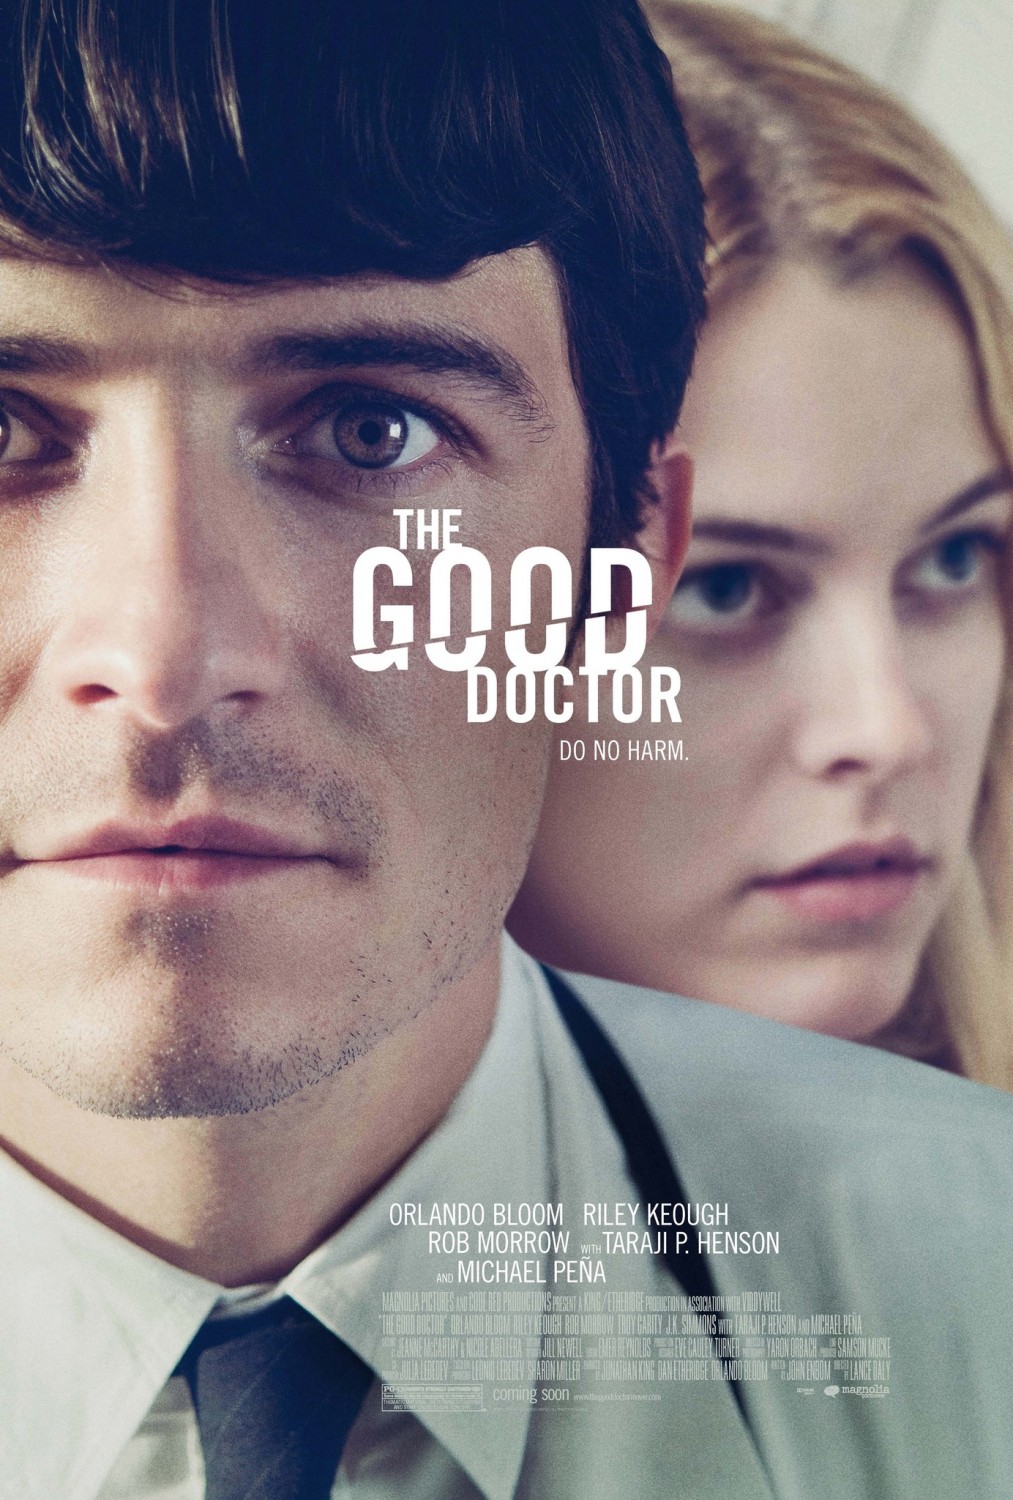 ҽ/һҽ The.Good.Doctor.2011.1080p.BluRay.x264.DTS-FGT 10.62GB-1.png